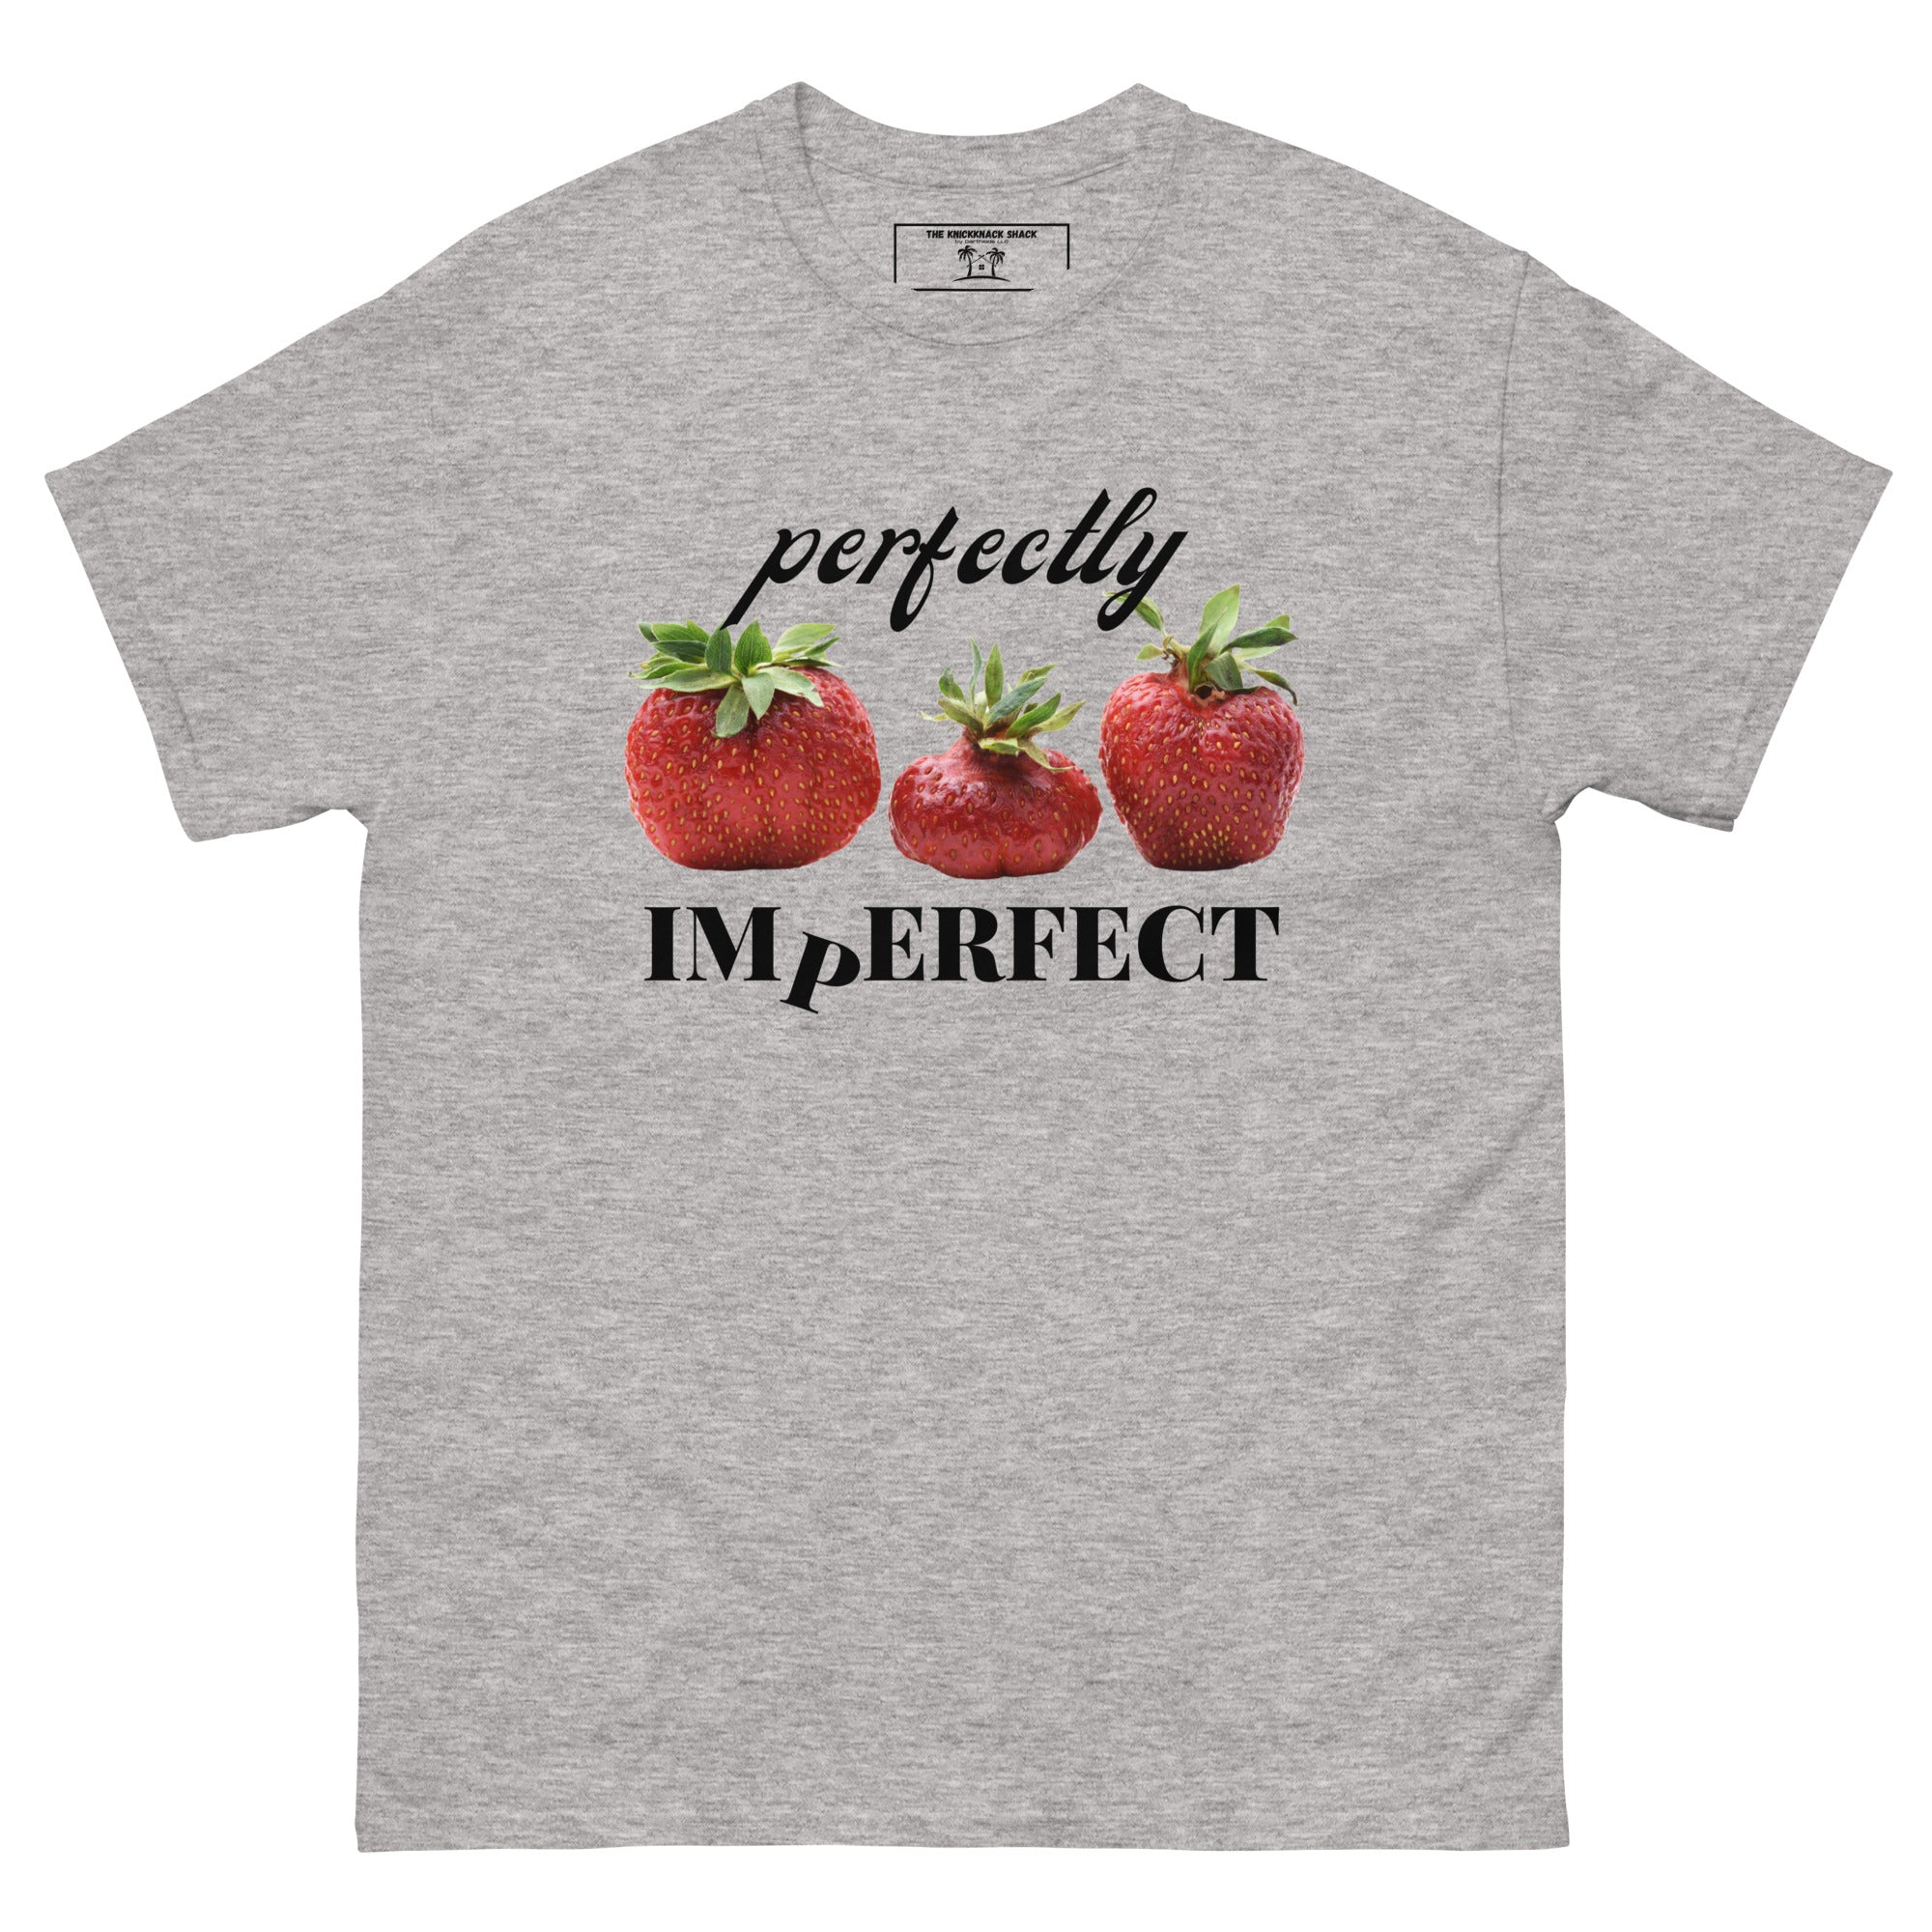 Classic Tee - Perfectly Imperfect (Style 1) (Light Colors)